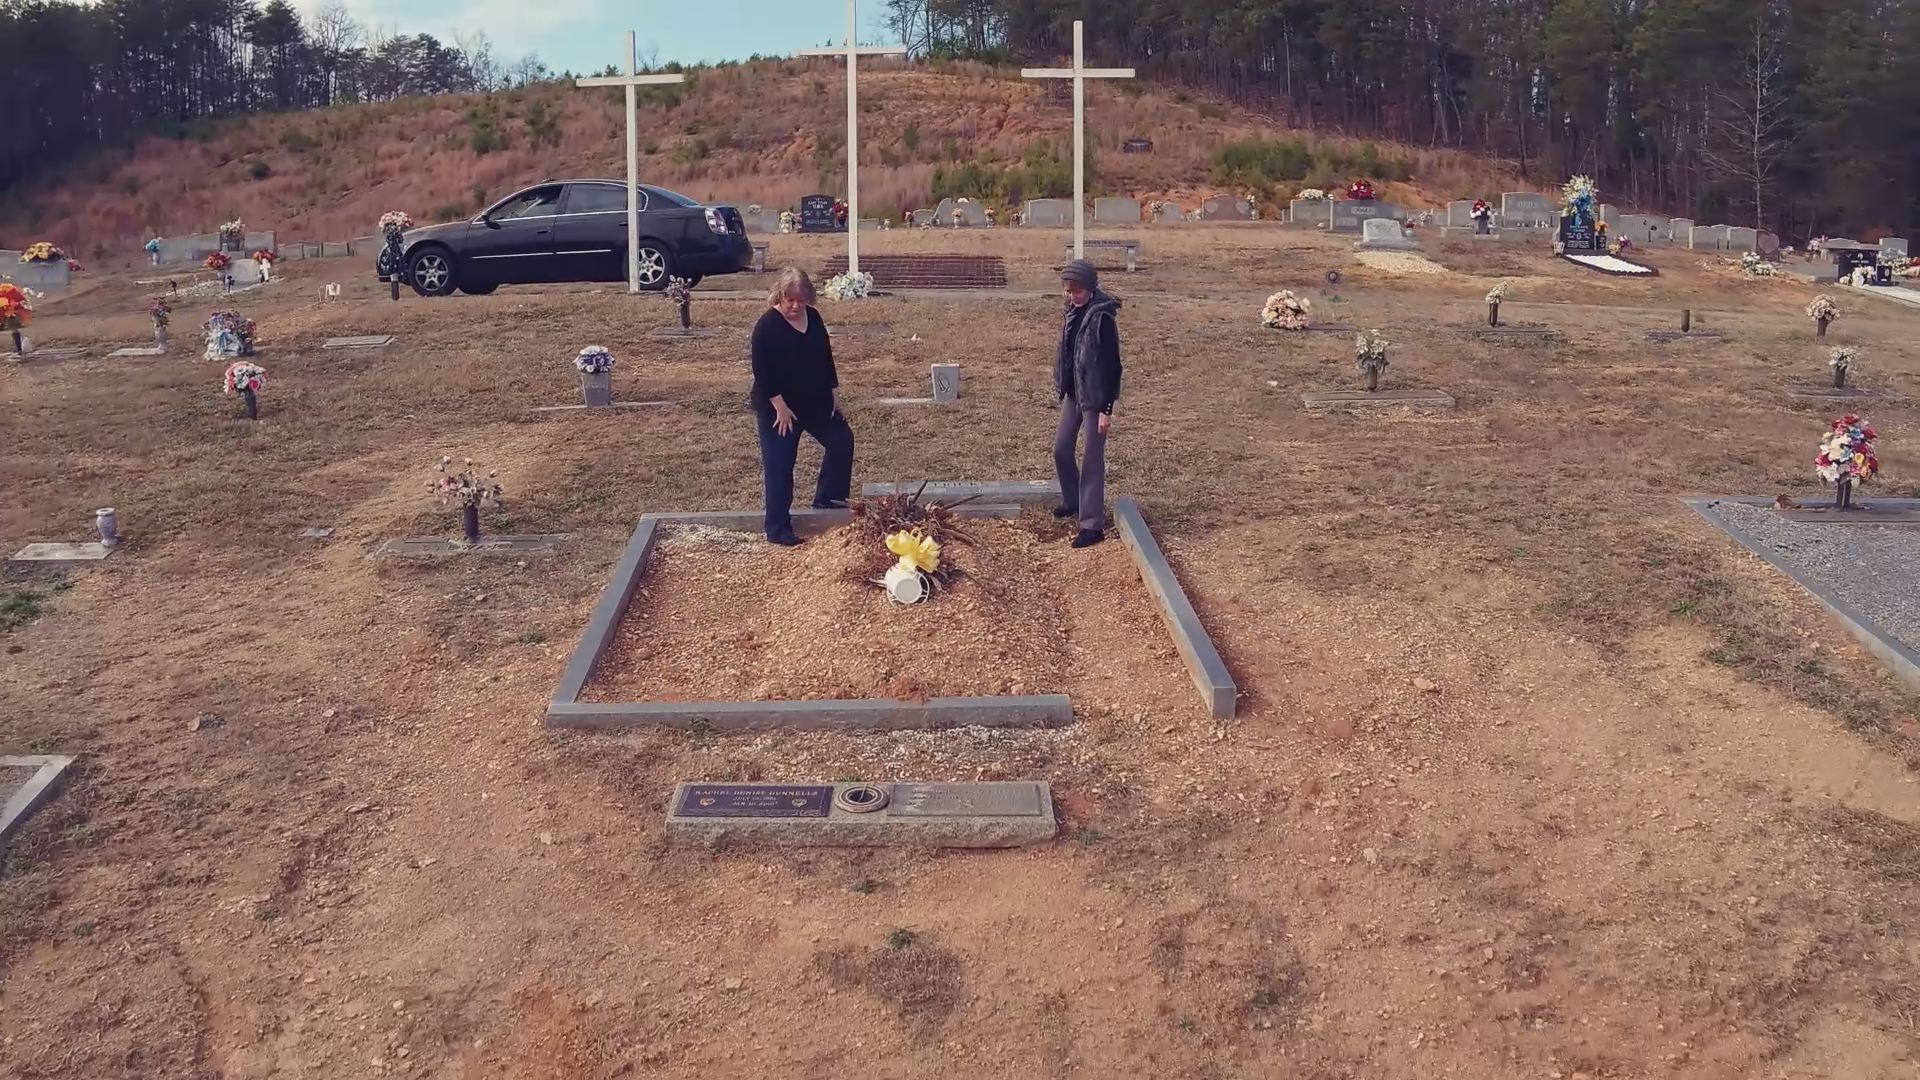 He planned to spend eternity next to his wife. But it wasn't until after his death that the cemetery discovered another body already in his grave.